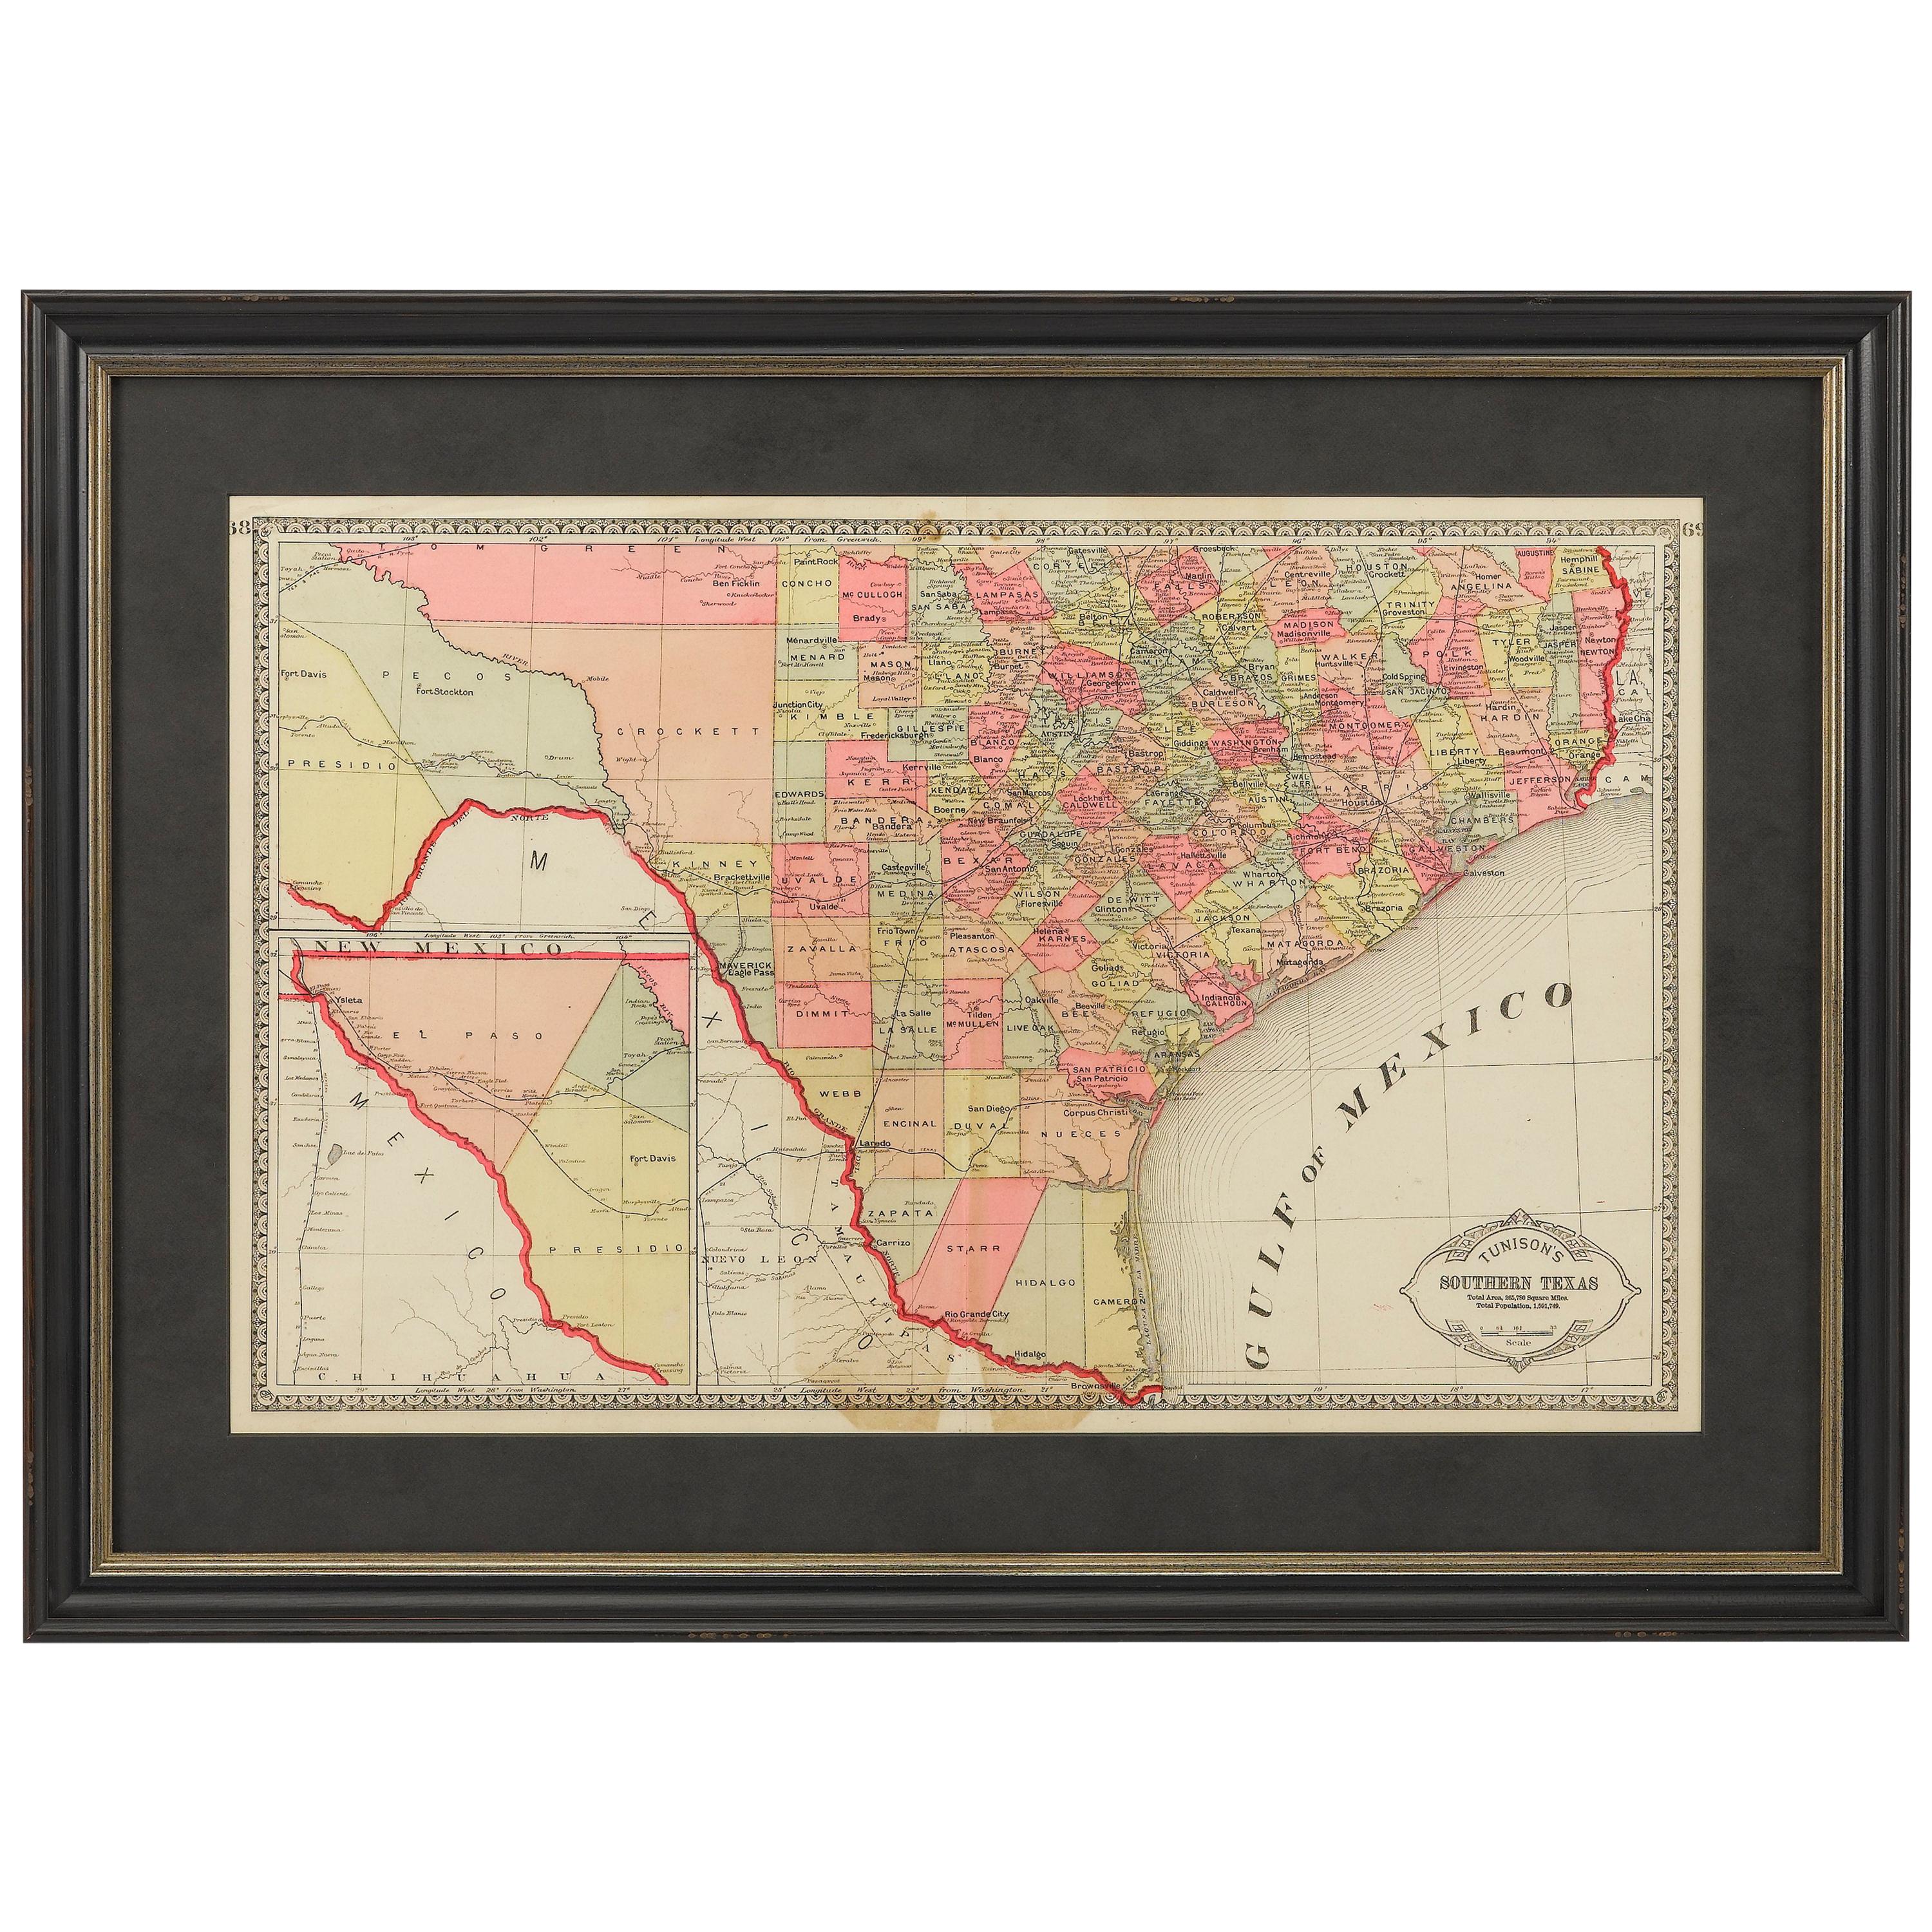 "Tunison's Southern Texas" by H.C. Tunison, circa 1885